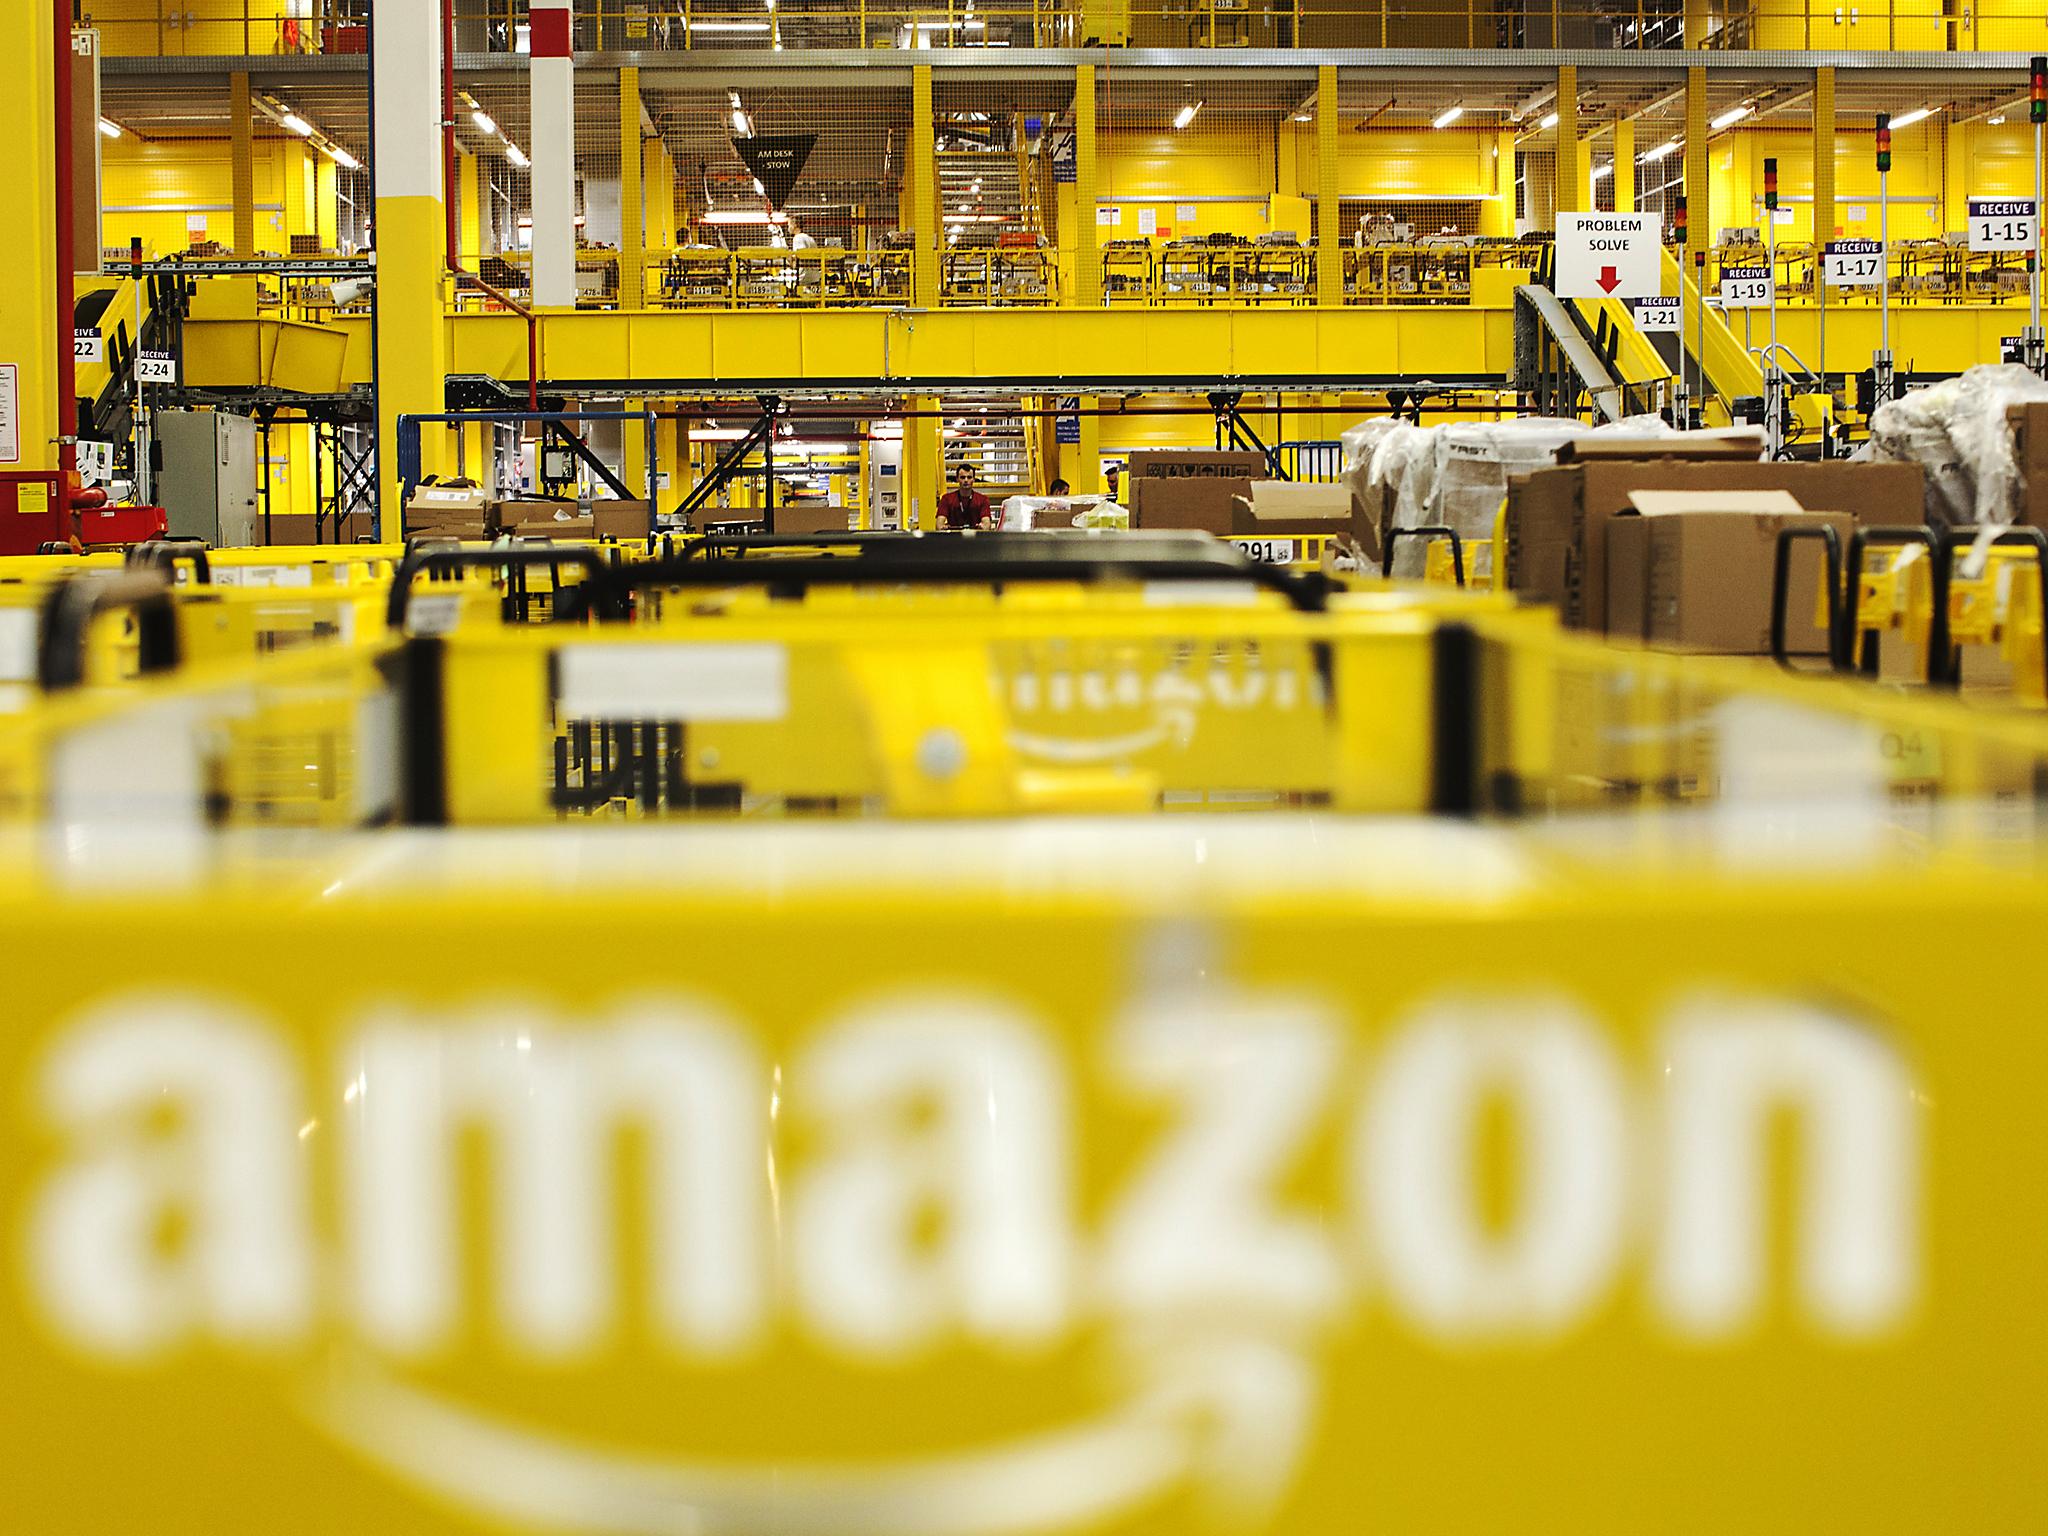 There has been a backlash against Amazon’s treatment of warehouse workers